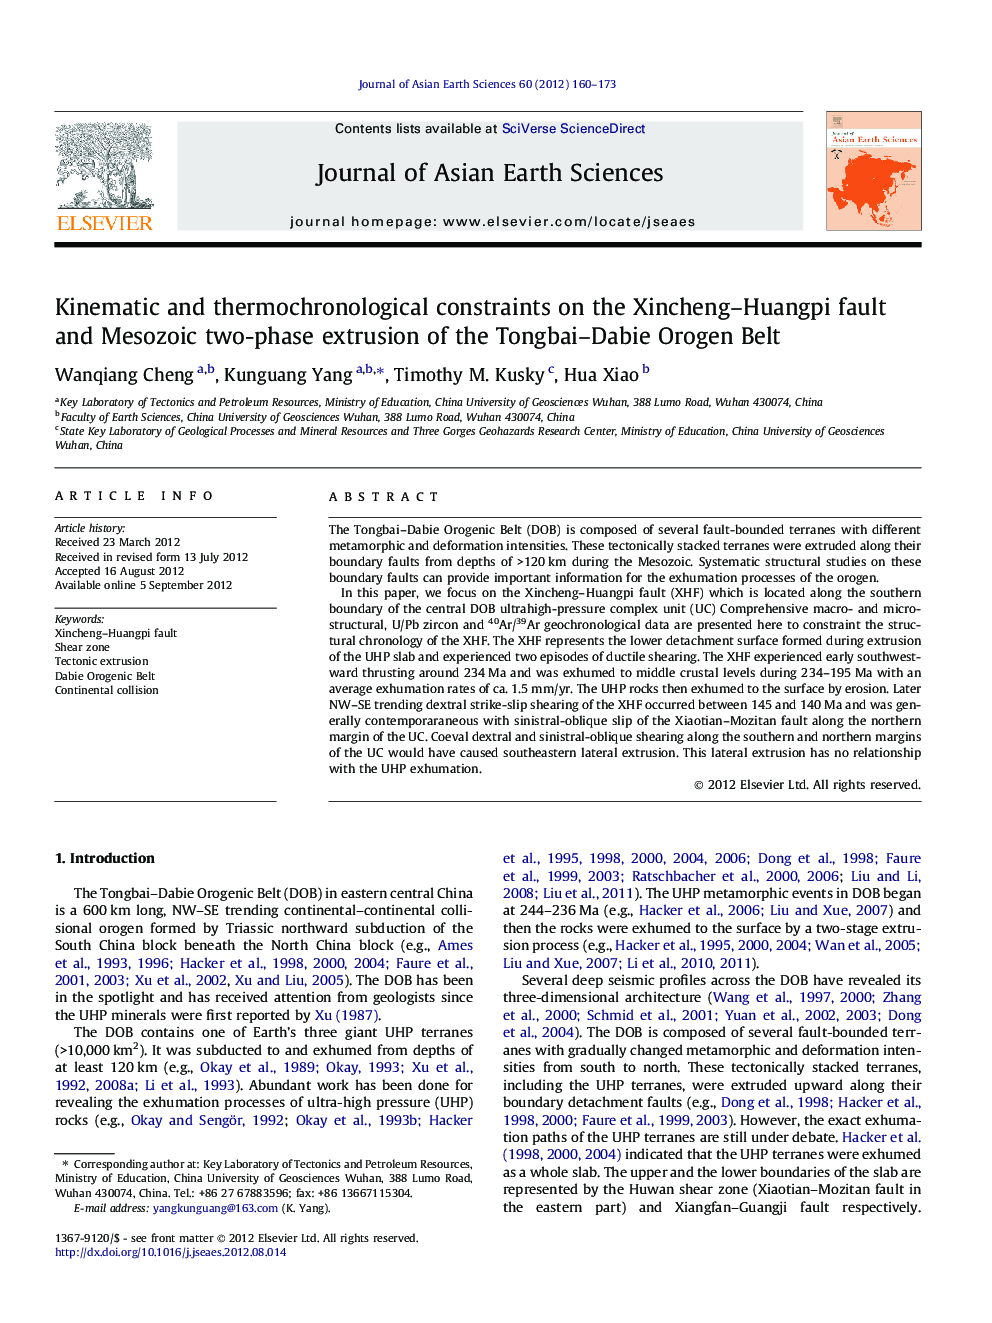 Kinematic and thermochronological constraints on the Xincheng–Huangpi fault and Mesozoic two-phase extrusion of the Tongbai–Dabie Orogen Belt